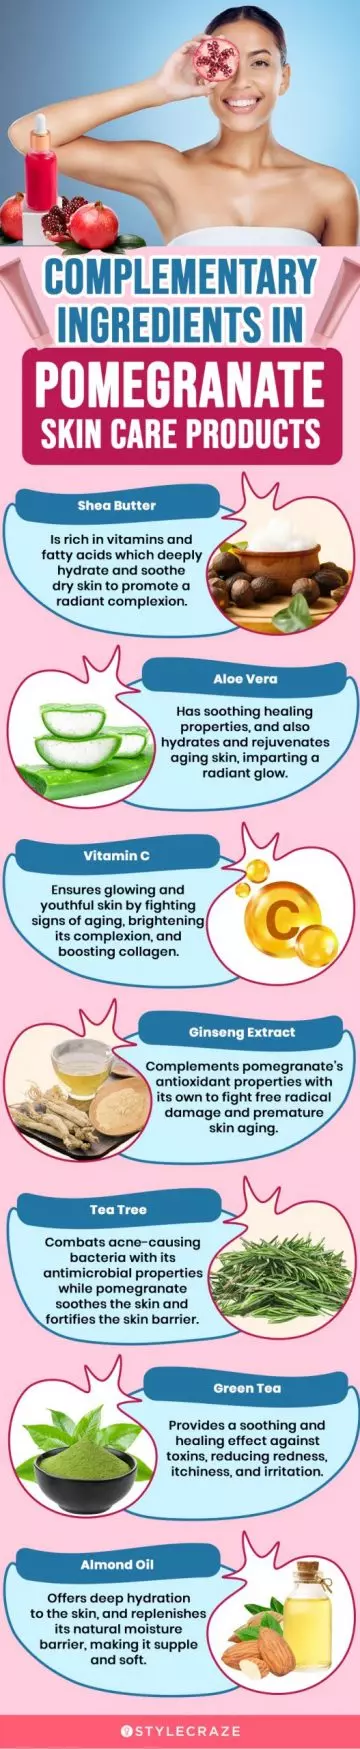 Complementary Ingredients In Pomegranate Skin Care Products (infographic)